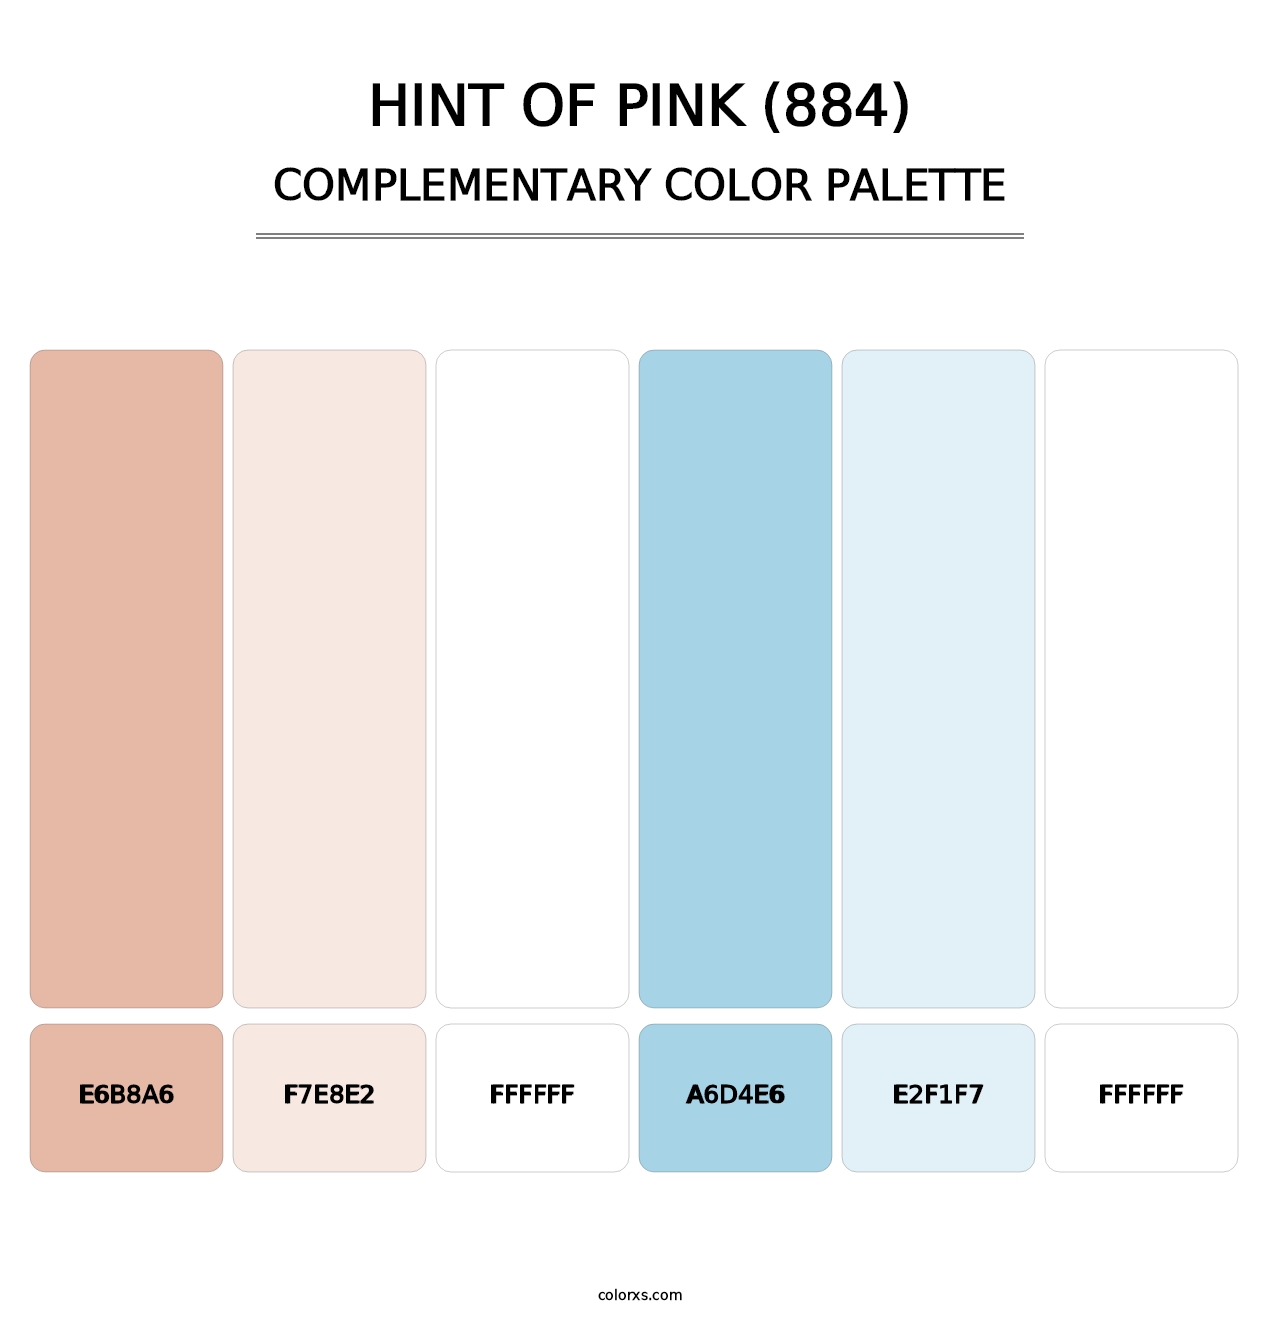 Hint of Pink (884) - Complementary Color Palette